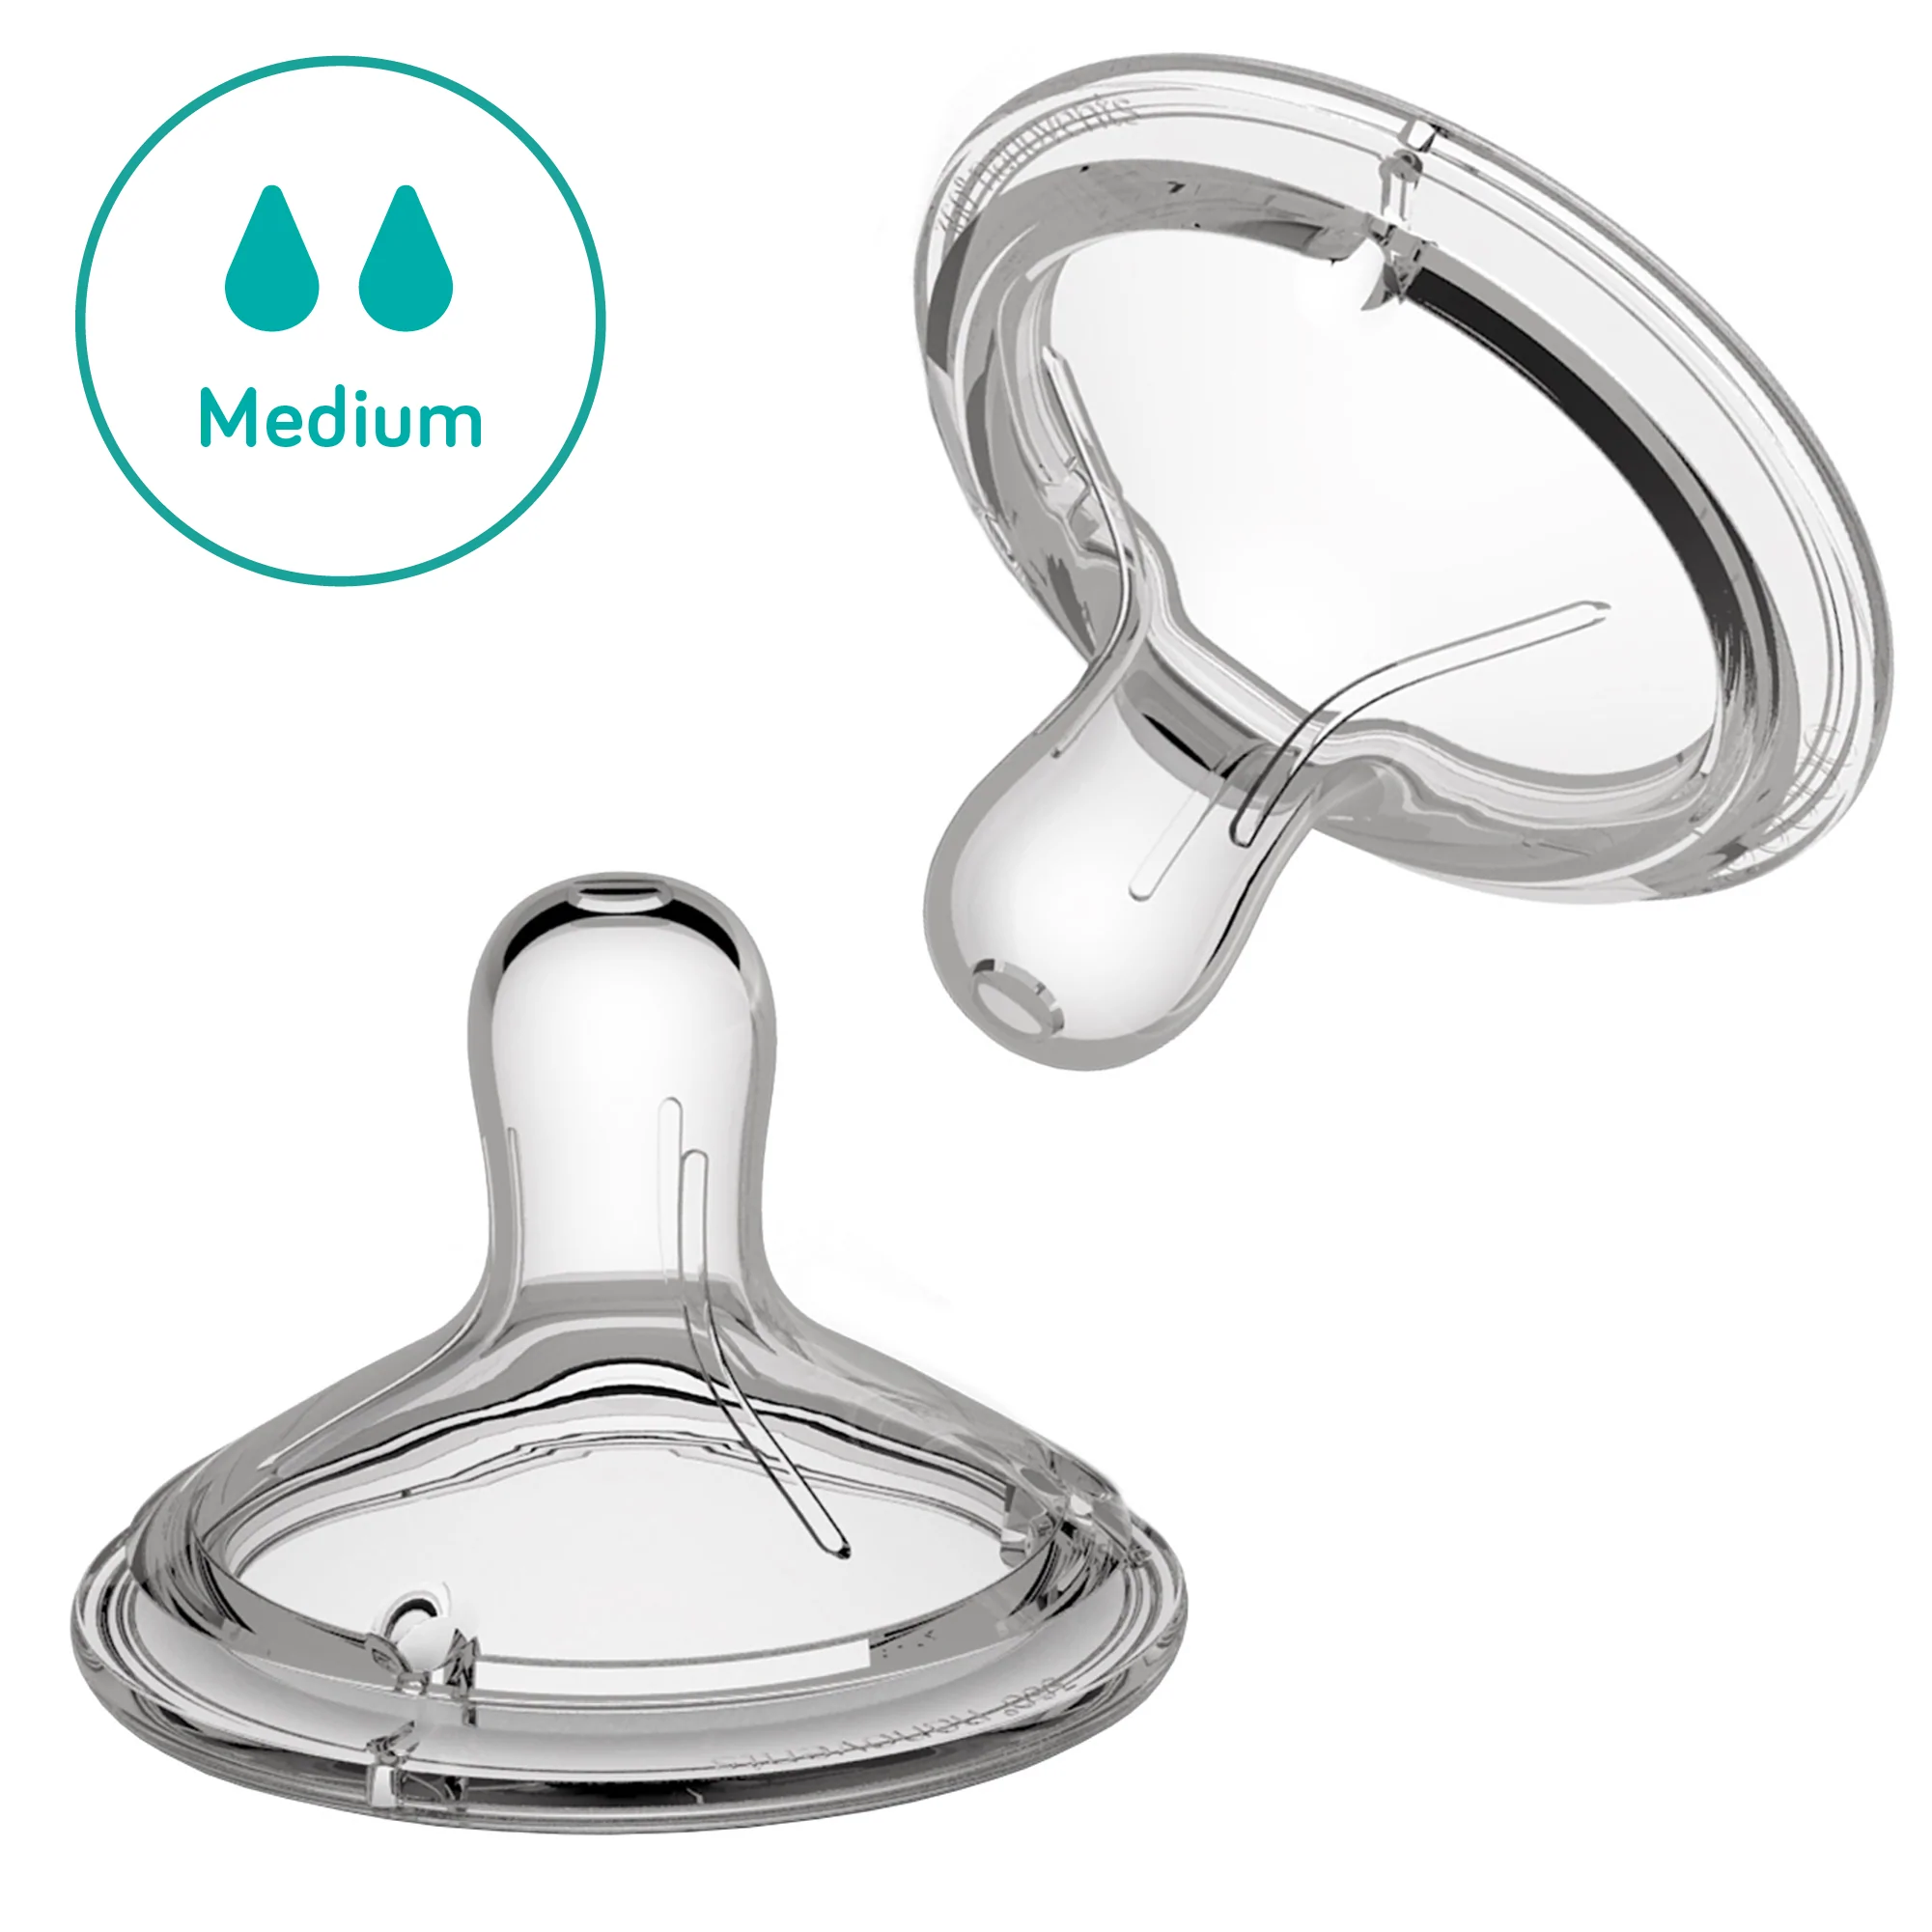 Nanobebe MEDIUM FLOW 3m+ Advanced Venting Silicone Teat -2 PACK - Tiny Tots Baby Store 